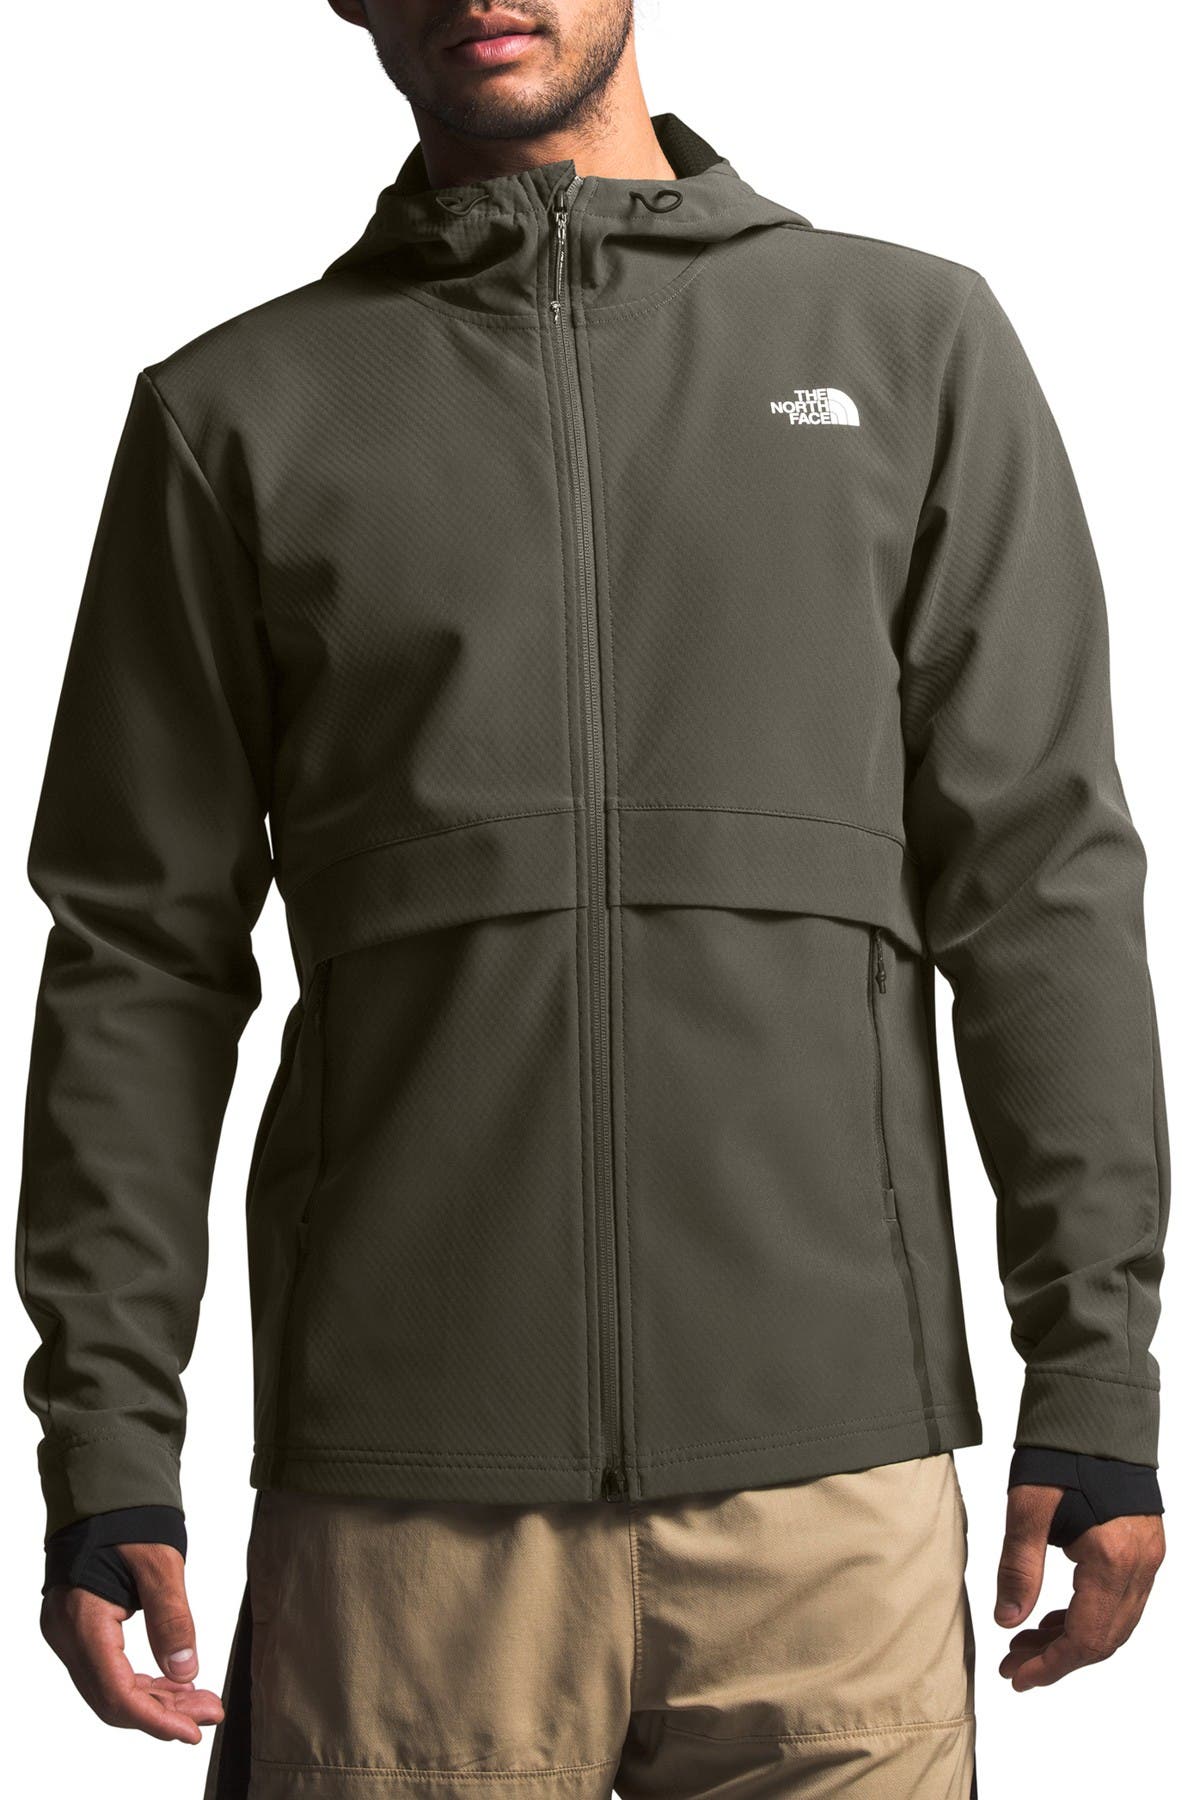 north face tactical jacket